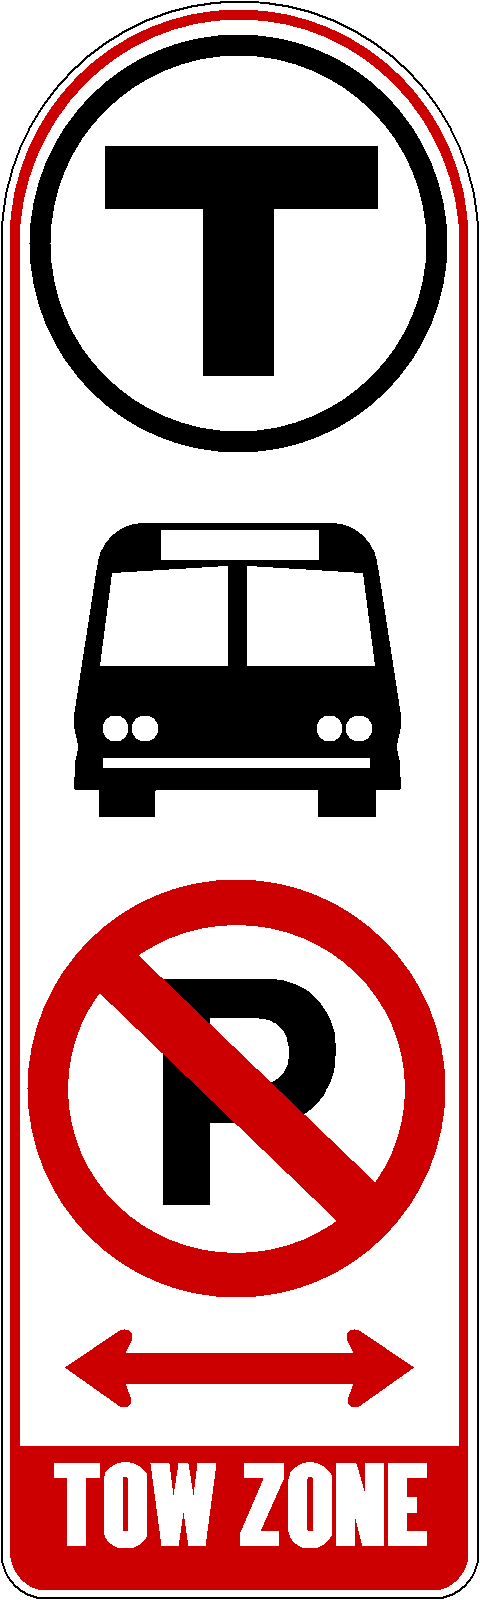 MBTA Bus Stop Sign by tpirman1982 on Clipart library